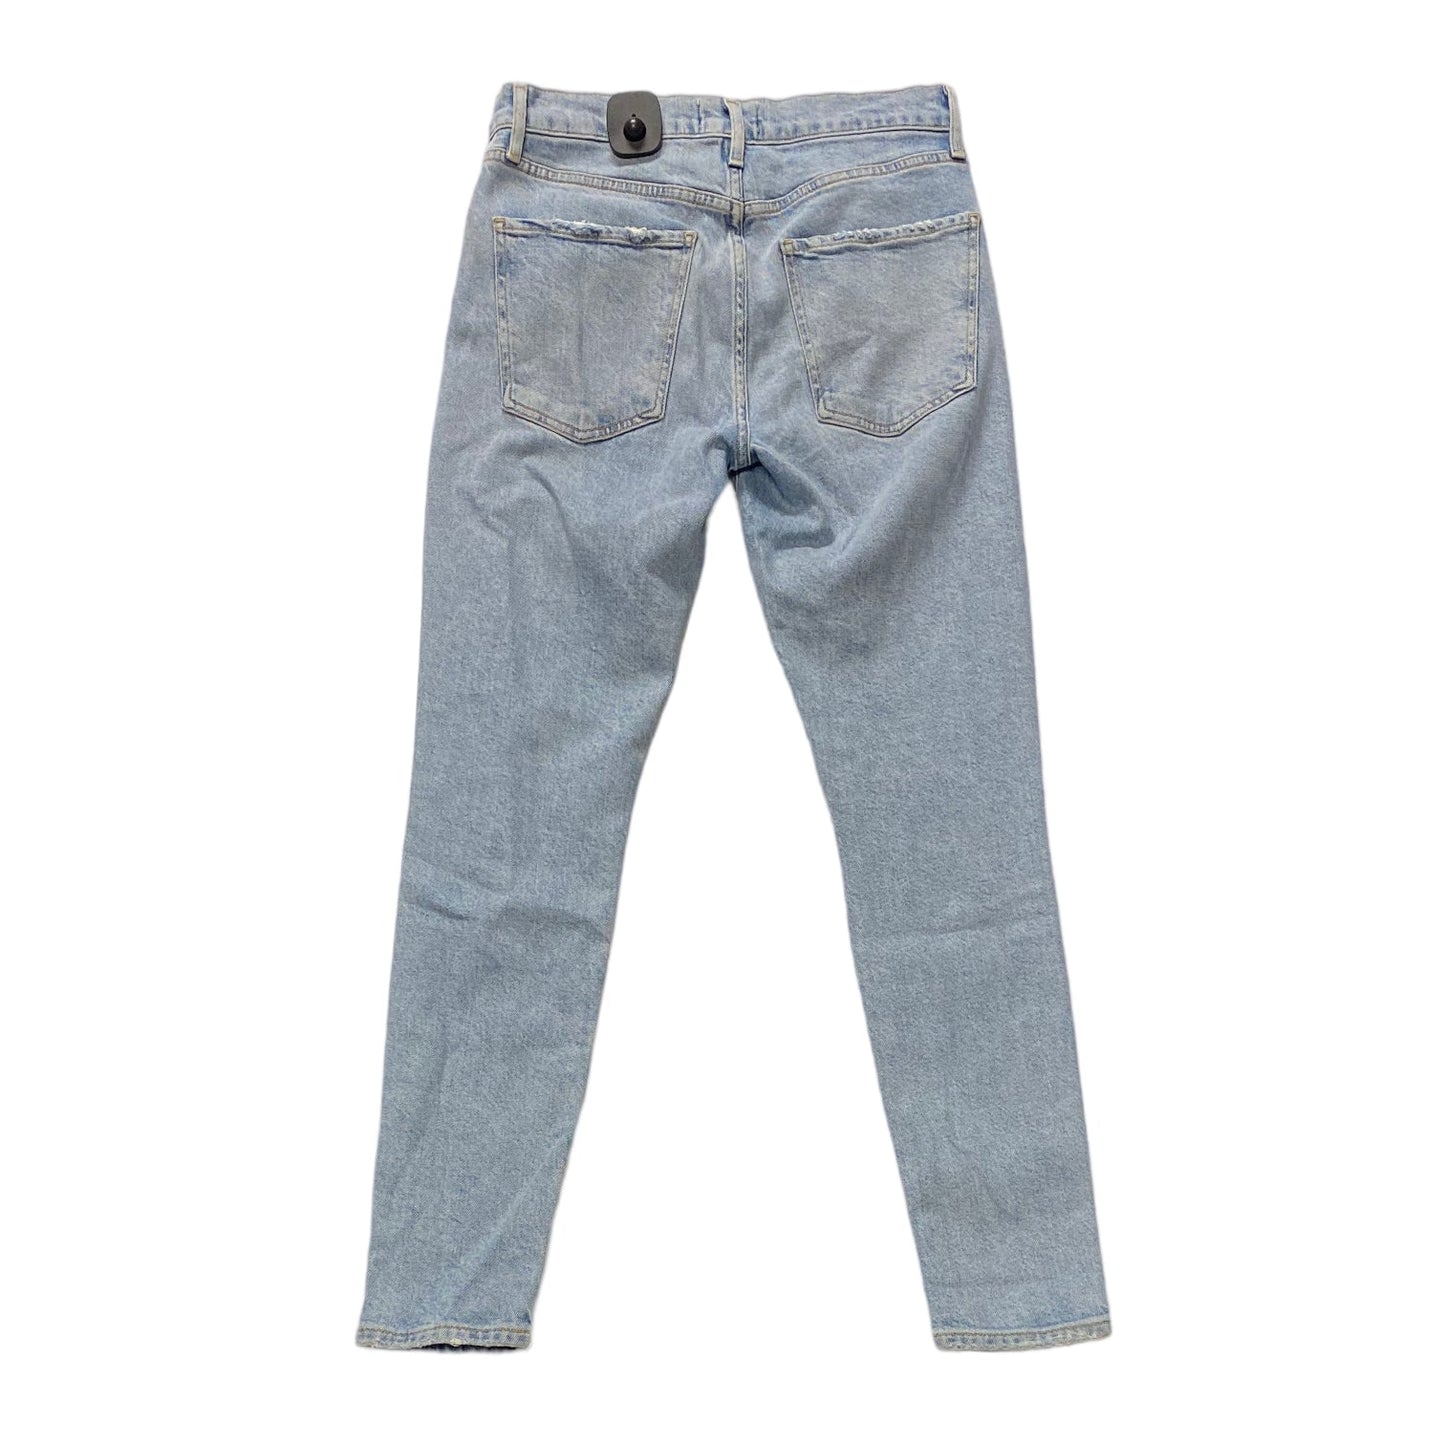 Jeans Skinny By Agolde  Size: 2